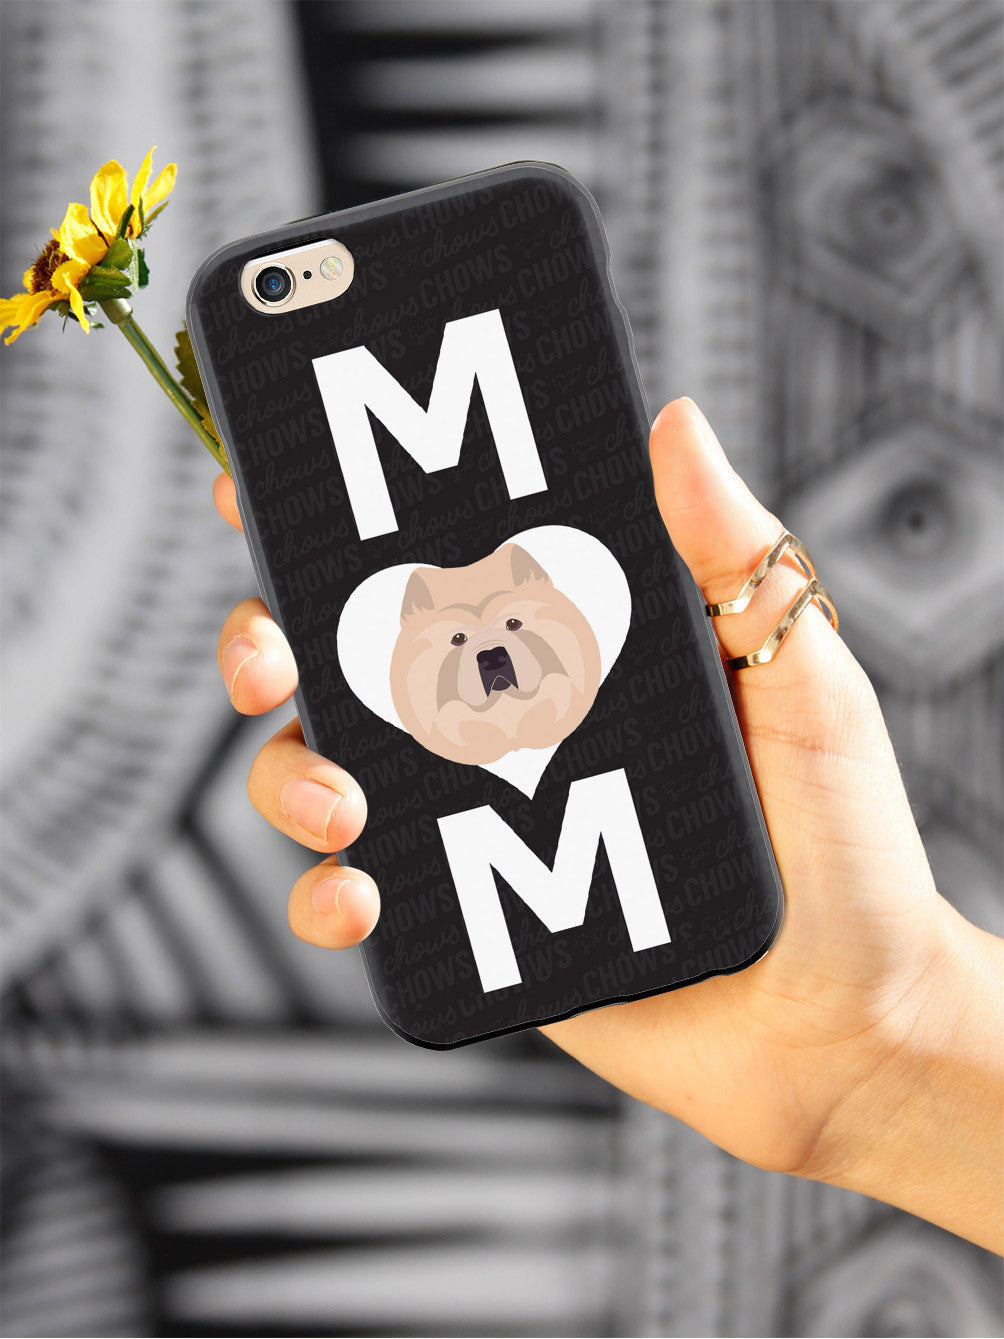 Chow Chow Mom Case